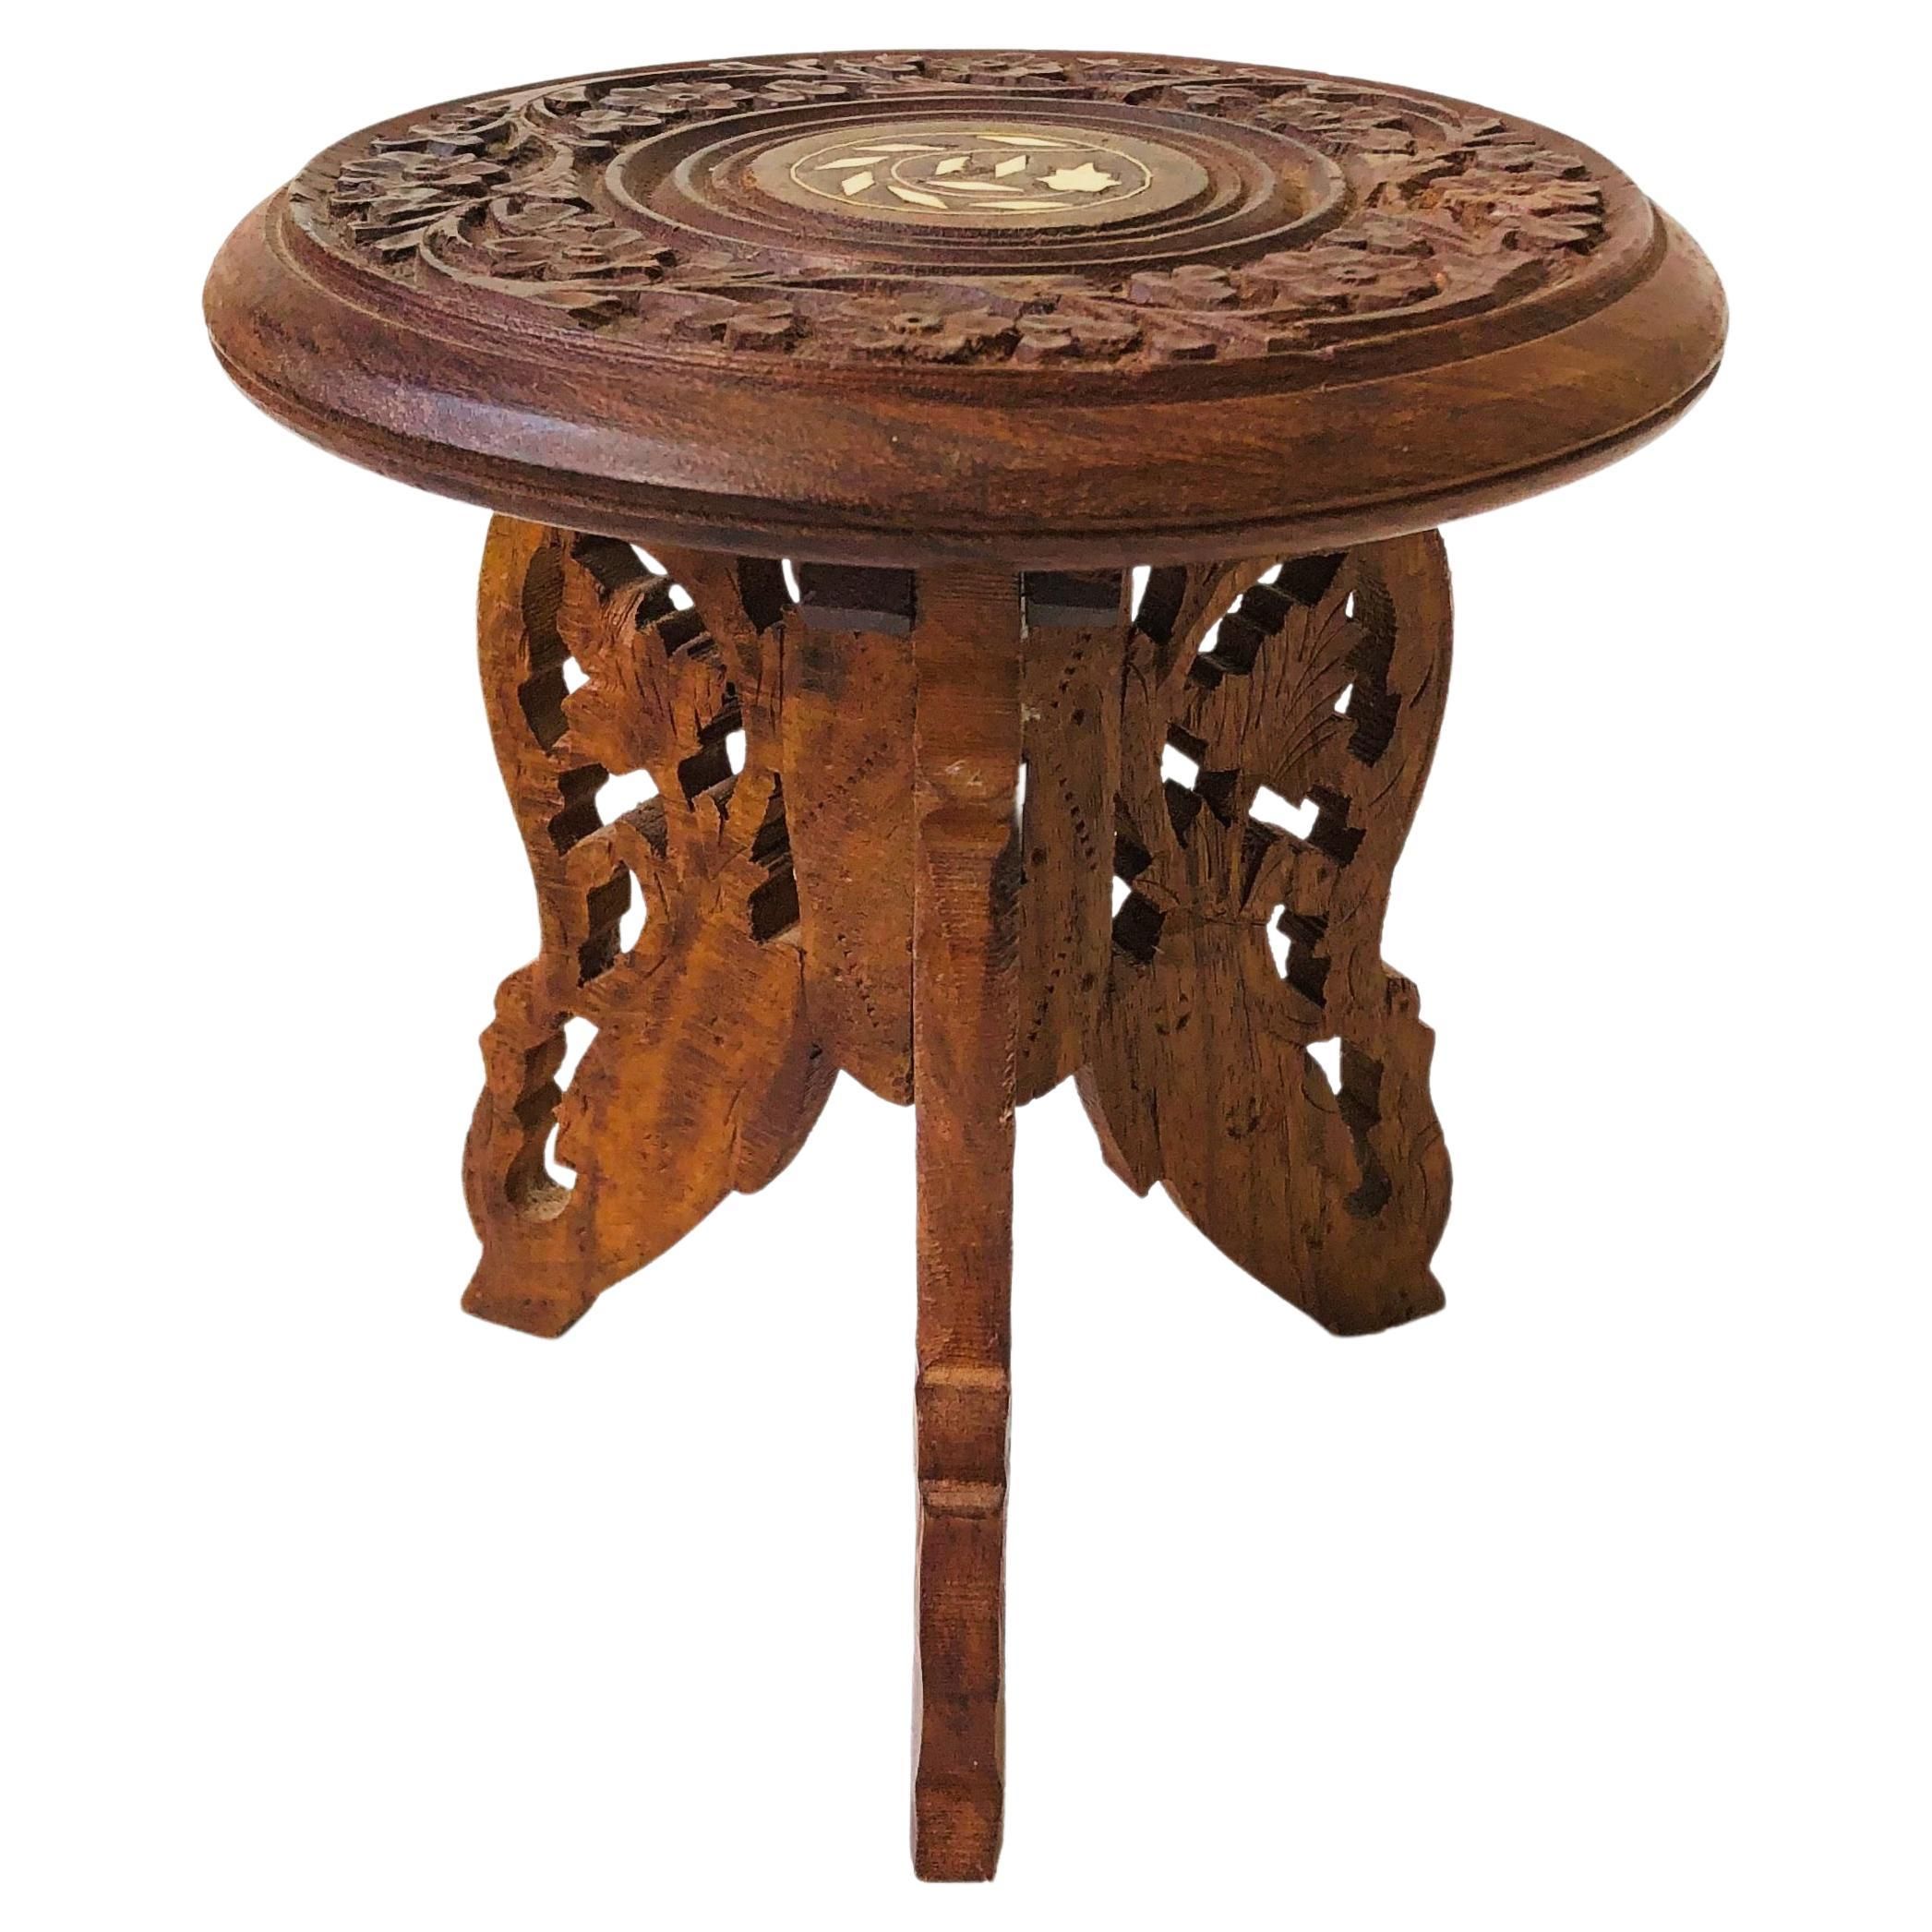 Vintage Medium Carved Wood Plant Stand For Sale At 1stdibs Pertaining To Carved Plant Stands (View 4 of 15)